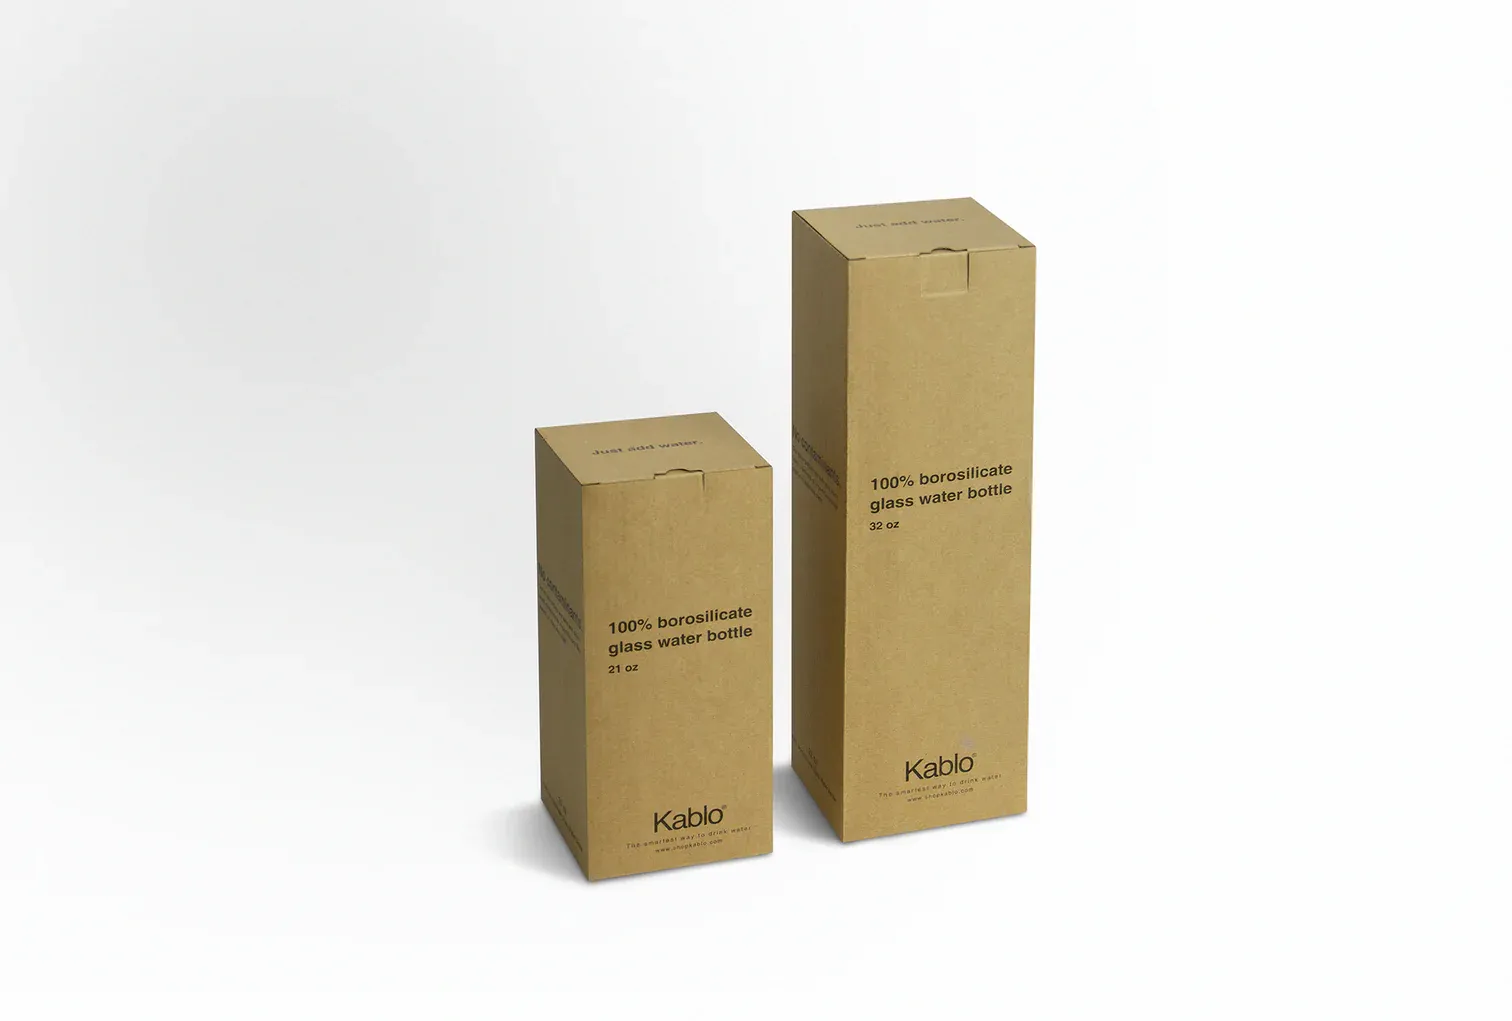 two cardboard boxes sitting side by side on a white surface